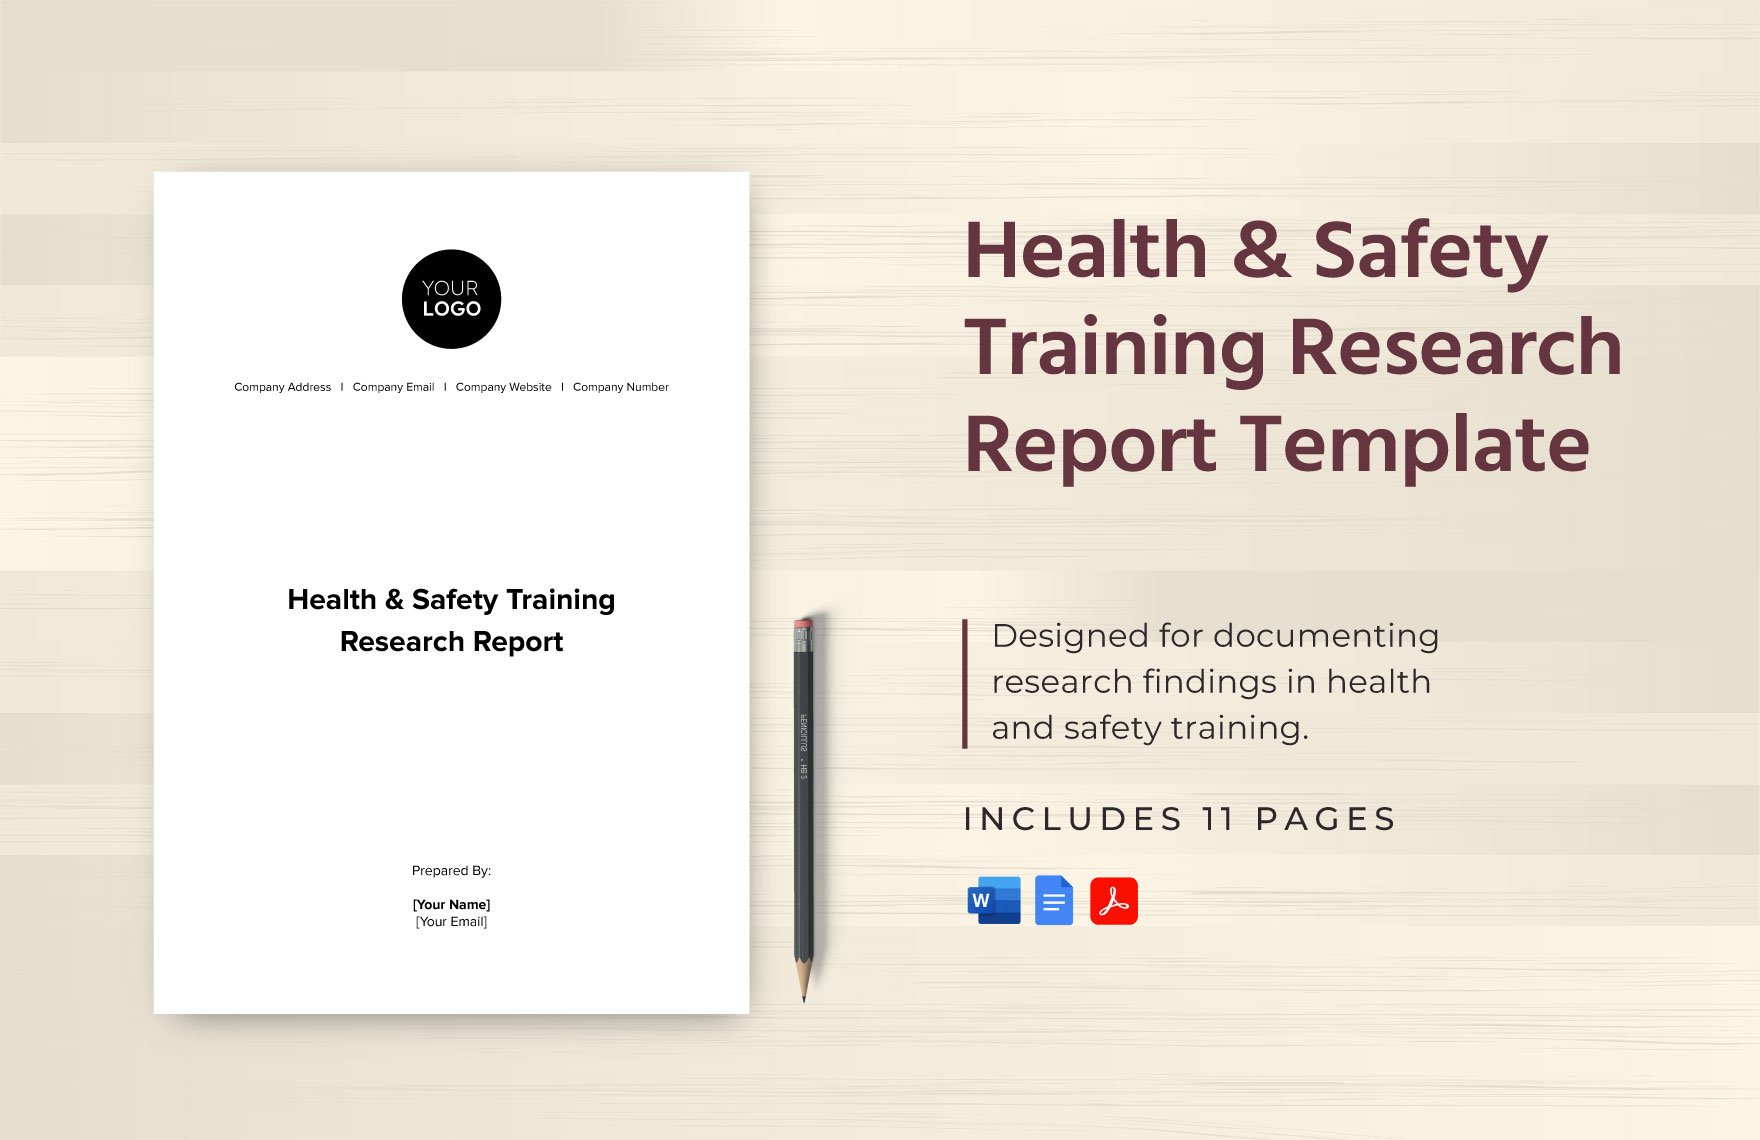 Health & Safety Training Research Report Template